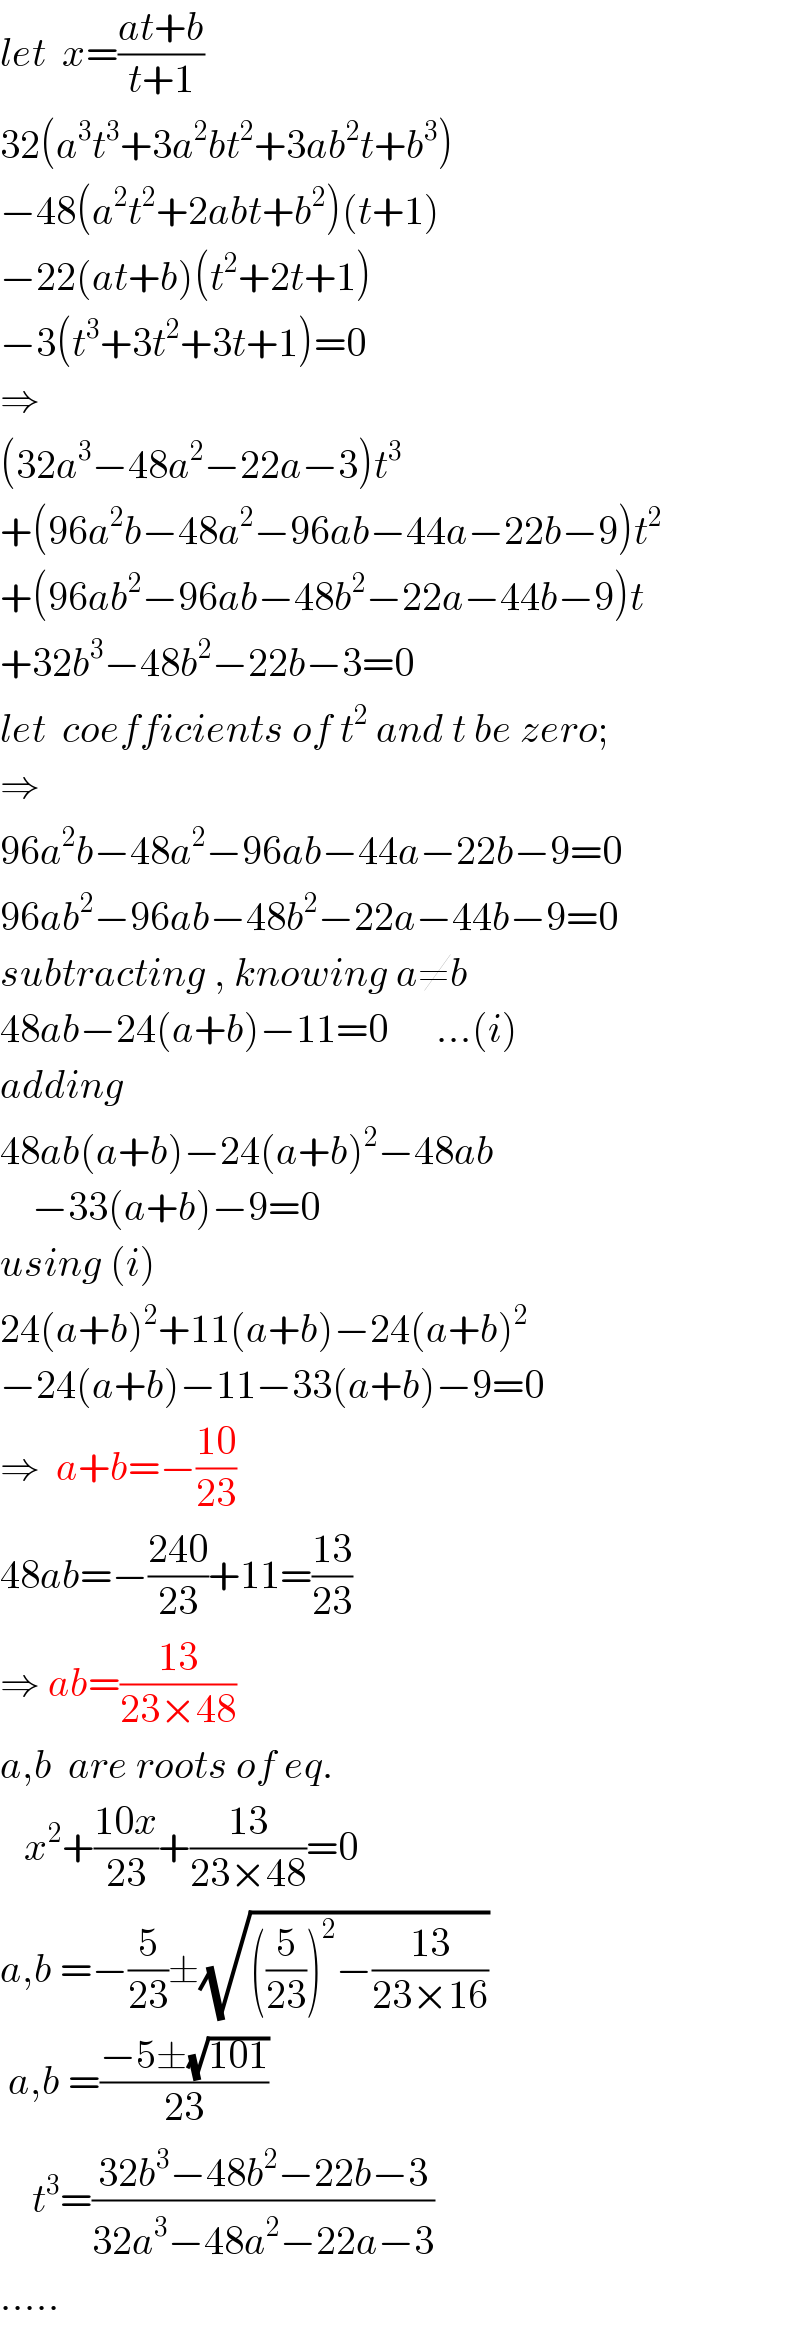 let  x=((at+b)/(t+1))  32(a^3 t^3 +3a^2 bt^2 +3ab^2 t+b^3 )  −48(a^2 t^2 +2abt+b^2 )(t+1)  −22(at+b)(t^2 +2t+1)  −3(t^3 +3t^2 +3t+1)=0  ⇒  (32a^3 −48a^2 −22a−3)t^3   +(96a^2 b−48a^2 −96ab−44a−22b−9)t^2   +(96ab^2 −96ab−48b^2 −22a−44b−9)t  +32b^3 −48b^2 −22b−3=0  let  coefficients of t^2  and t be zero;  ⇒  96a^2 b−48a^2 −96ab−44a−22b−9=0  96ab^2 −96ab−48b^2 −22a−44b−9=0  subtracting , knowing a≠b  48ab−24(a+b)−11=0      ...(i)  adding  48ab(a+b)−24(a+b)^2 −48ab      −33(a+b)−9=0  using (i)  24(a+b)^2 +11(a+b)−24(a+b)^2   −24(a+b)−11−33(a+b)−9=0  ⇒  a+b=−((10)/(23))  48ab=−((240)/(23))+11=((13)/(23))  ⇒ ab=((13)/(23×48))  a,b  are roots of eq.     x^2 +((10x)/(23))+((13)/(23×48))=0  a,b =−(5/(23))±(√(((5/(23)))^2 −((13)/(23×16))))   a,b =((−5±(√(101)))/(23))      t^3 =((32b^3 −48b^2 −22b−3)/(32a^3 −48a^2 −22a−3))  .....  